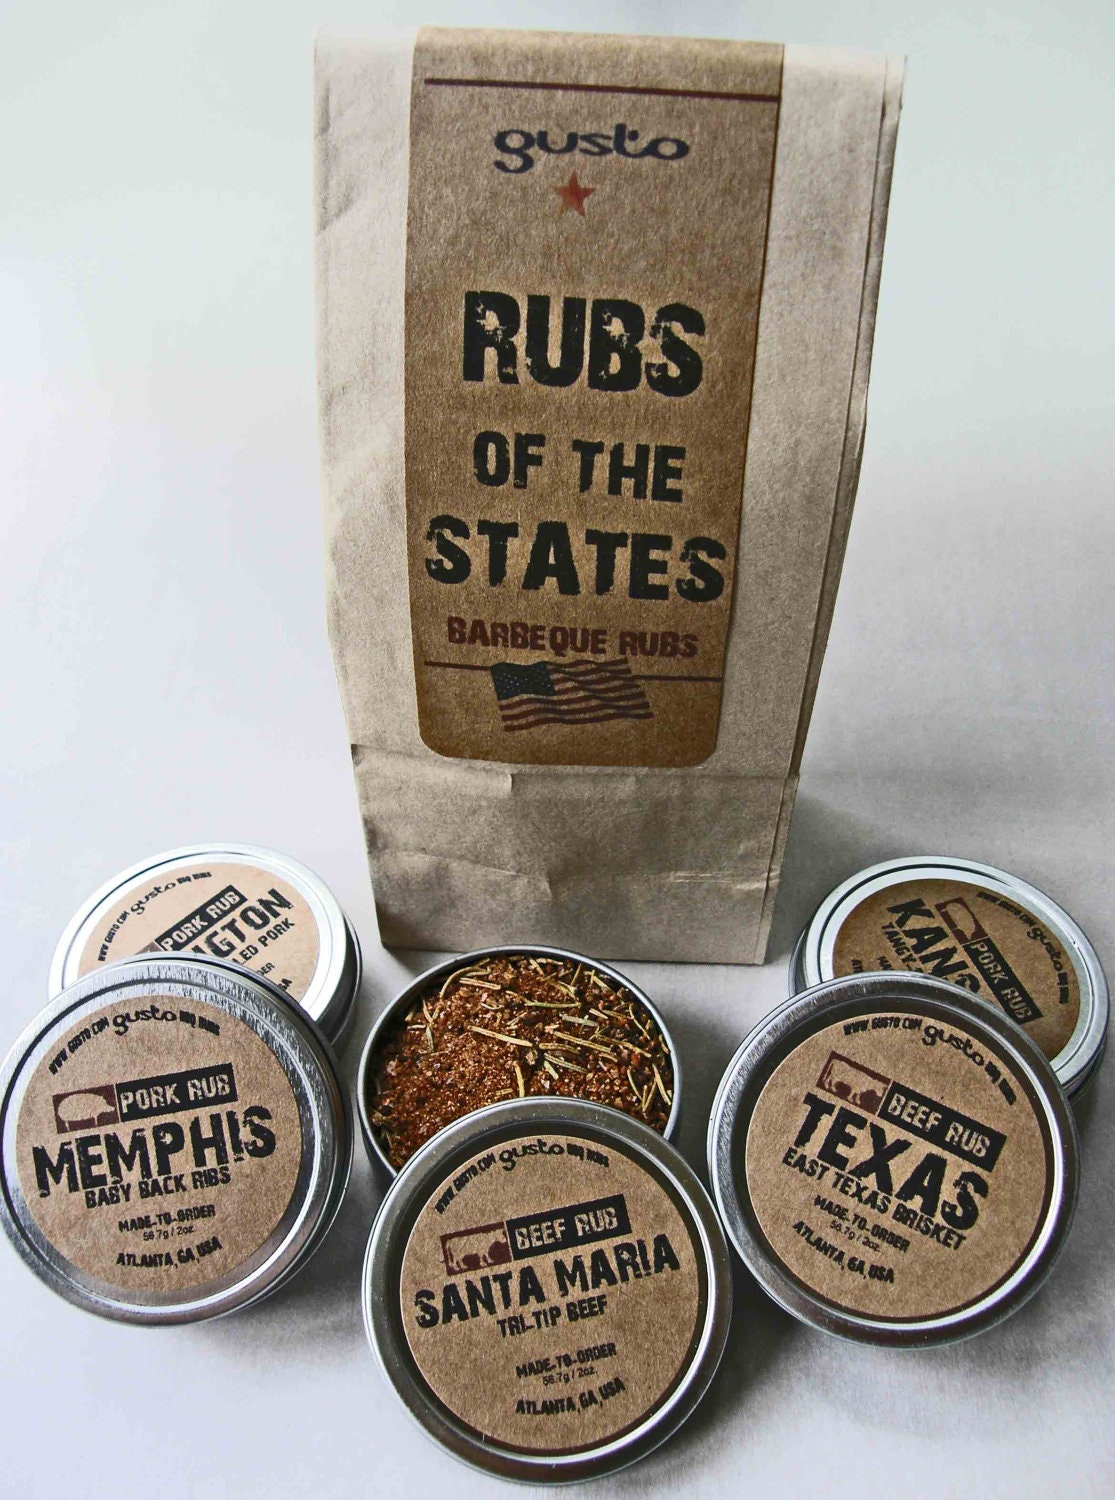 Gusto - Rubs of the States - Barbeque Rub Gift Set - BBQ Grilling